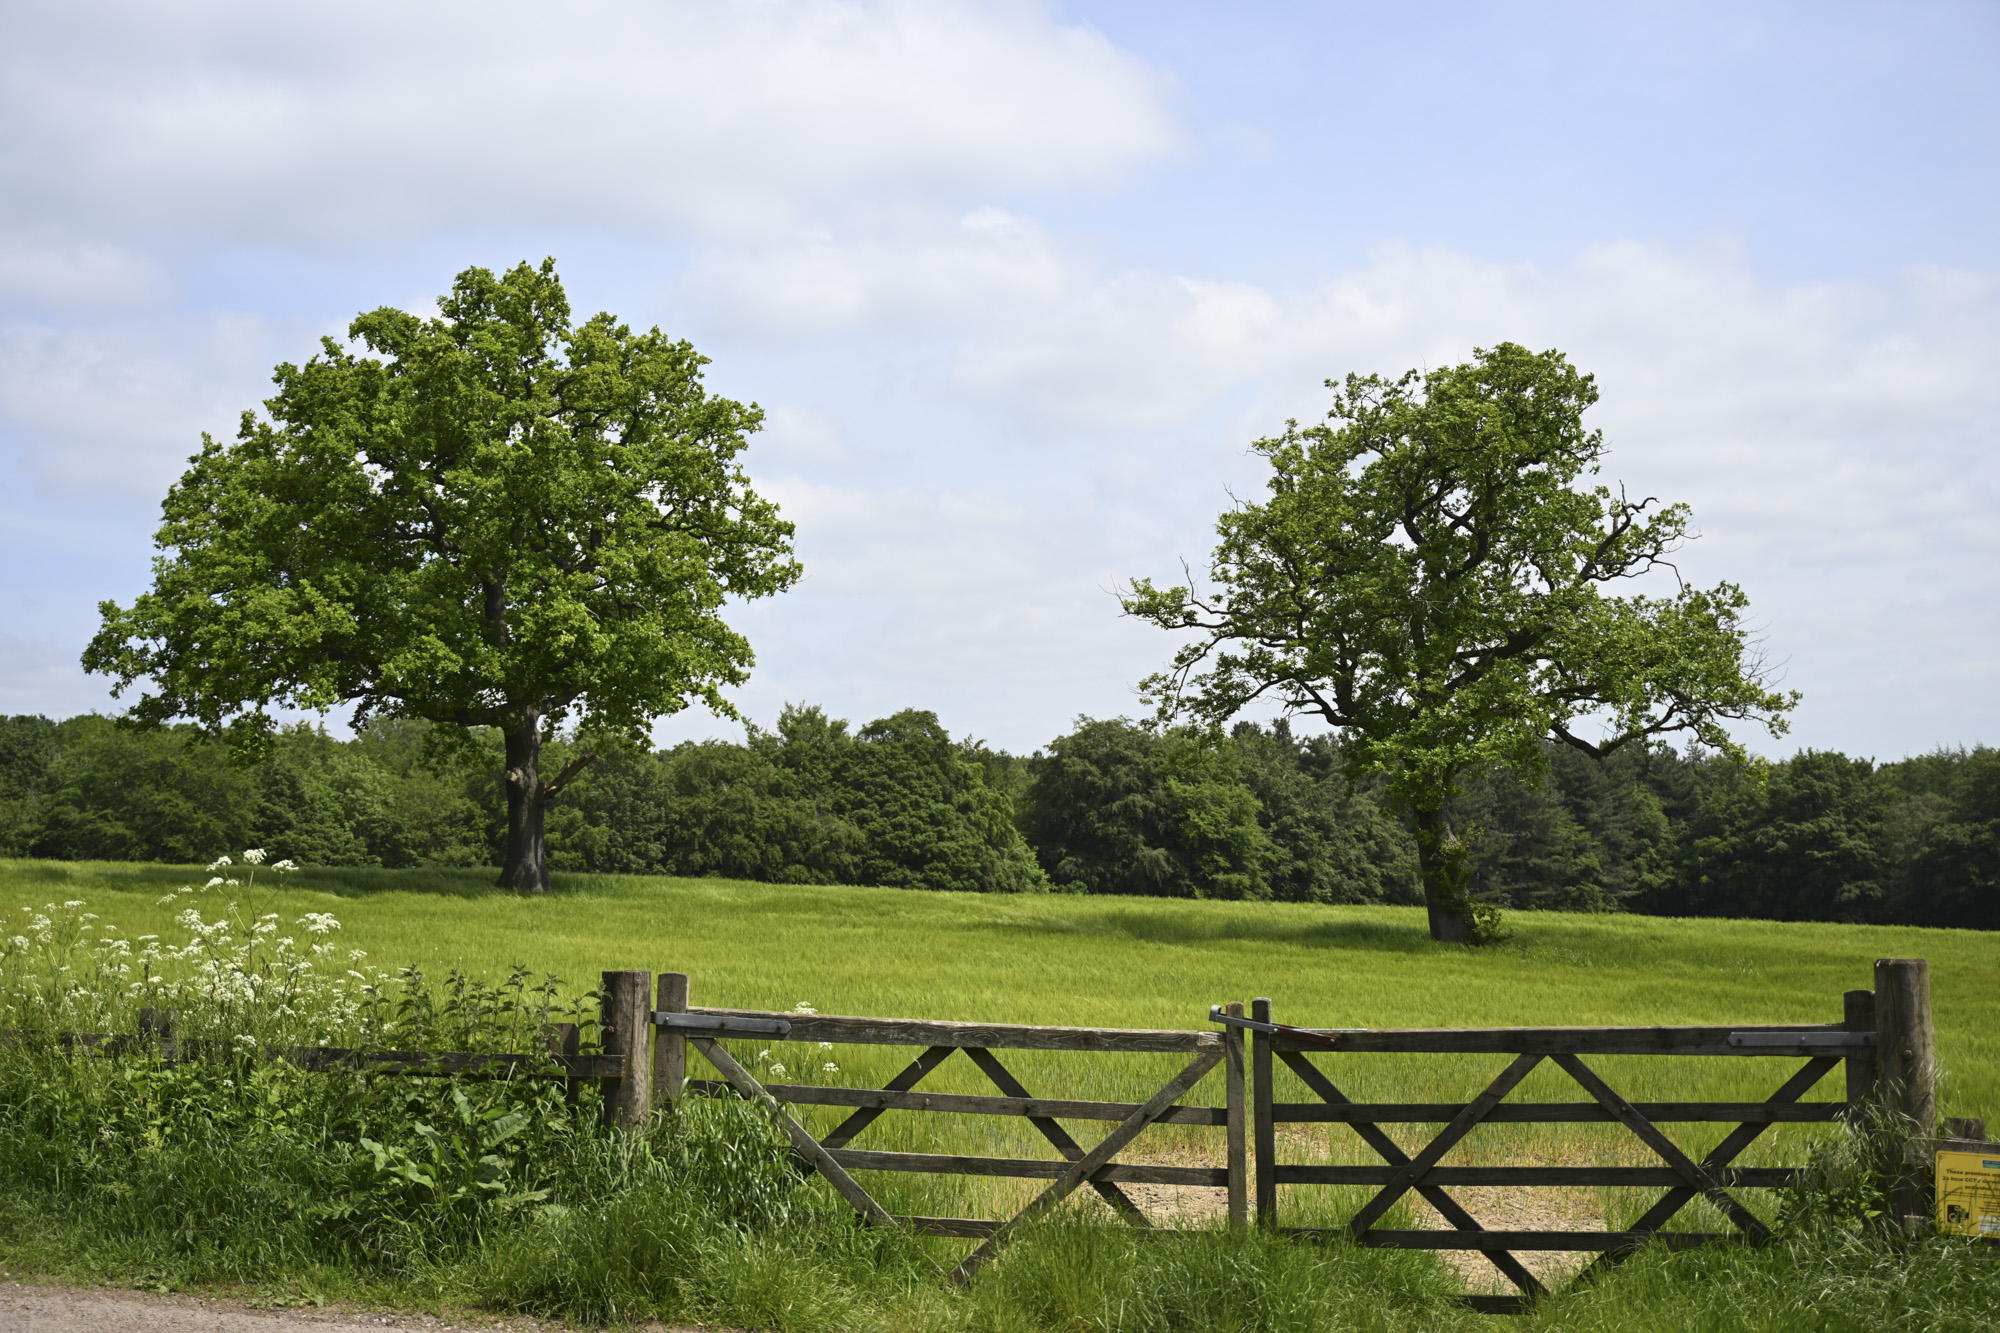 Two trees behind a wooden gate in a green field with suuny cloudy skies